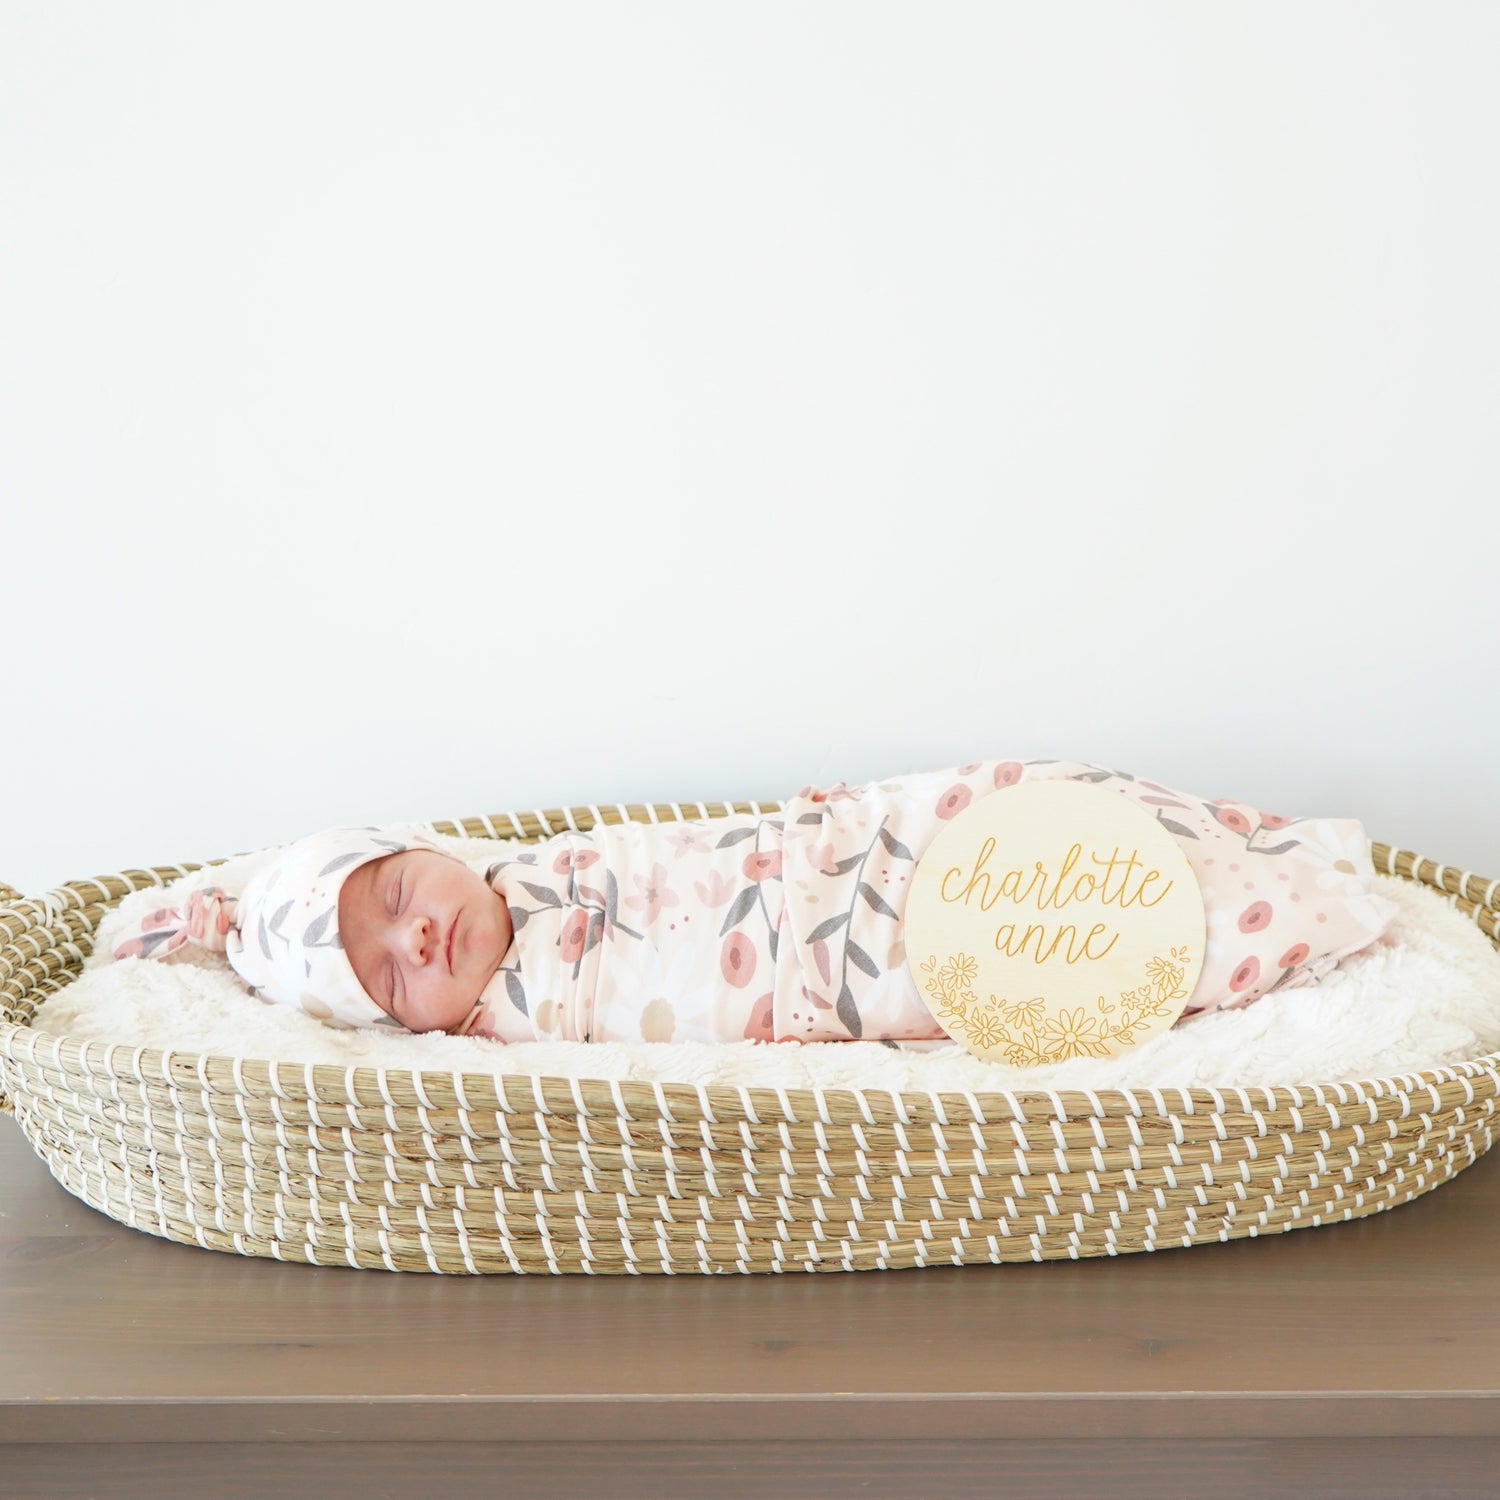 peach posey hat swaddle and custom sign set with baby in basinet in nursery